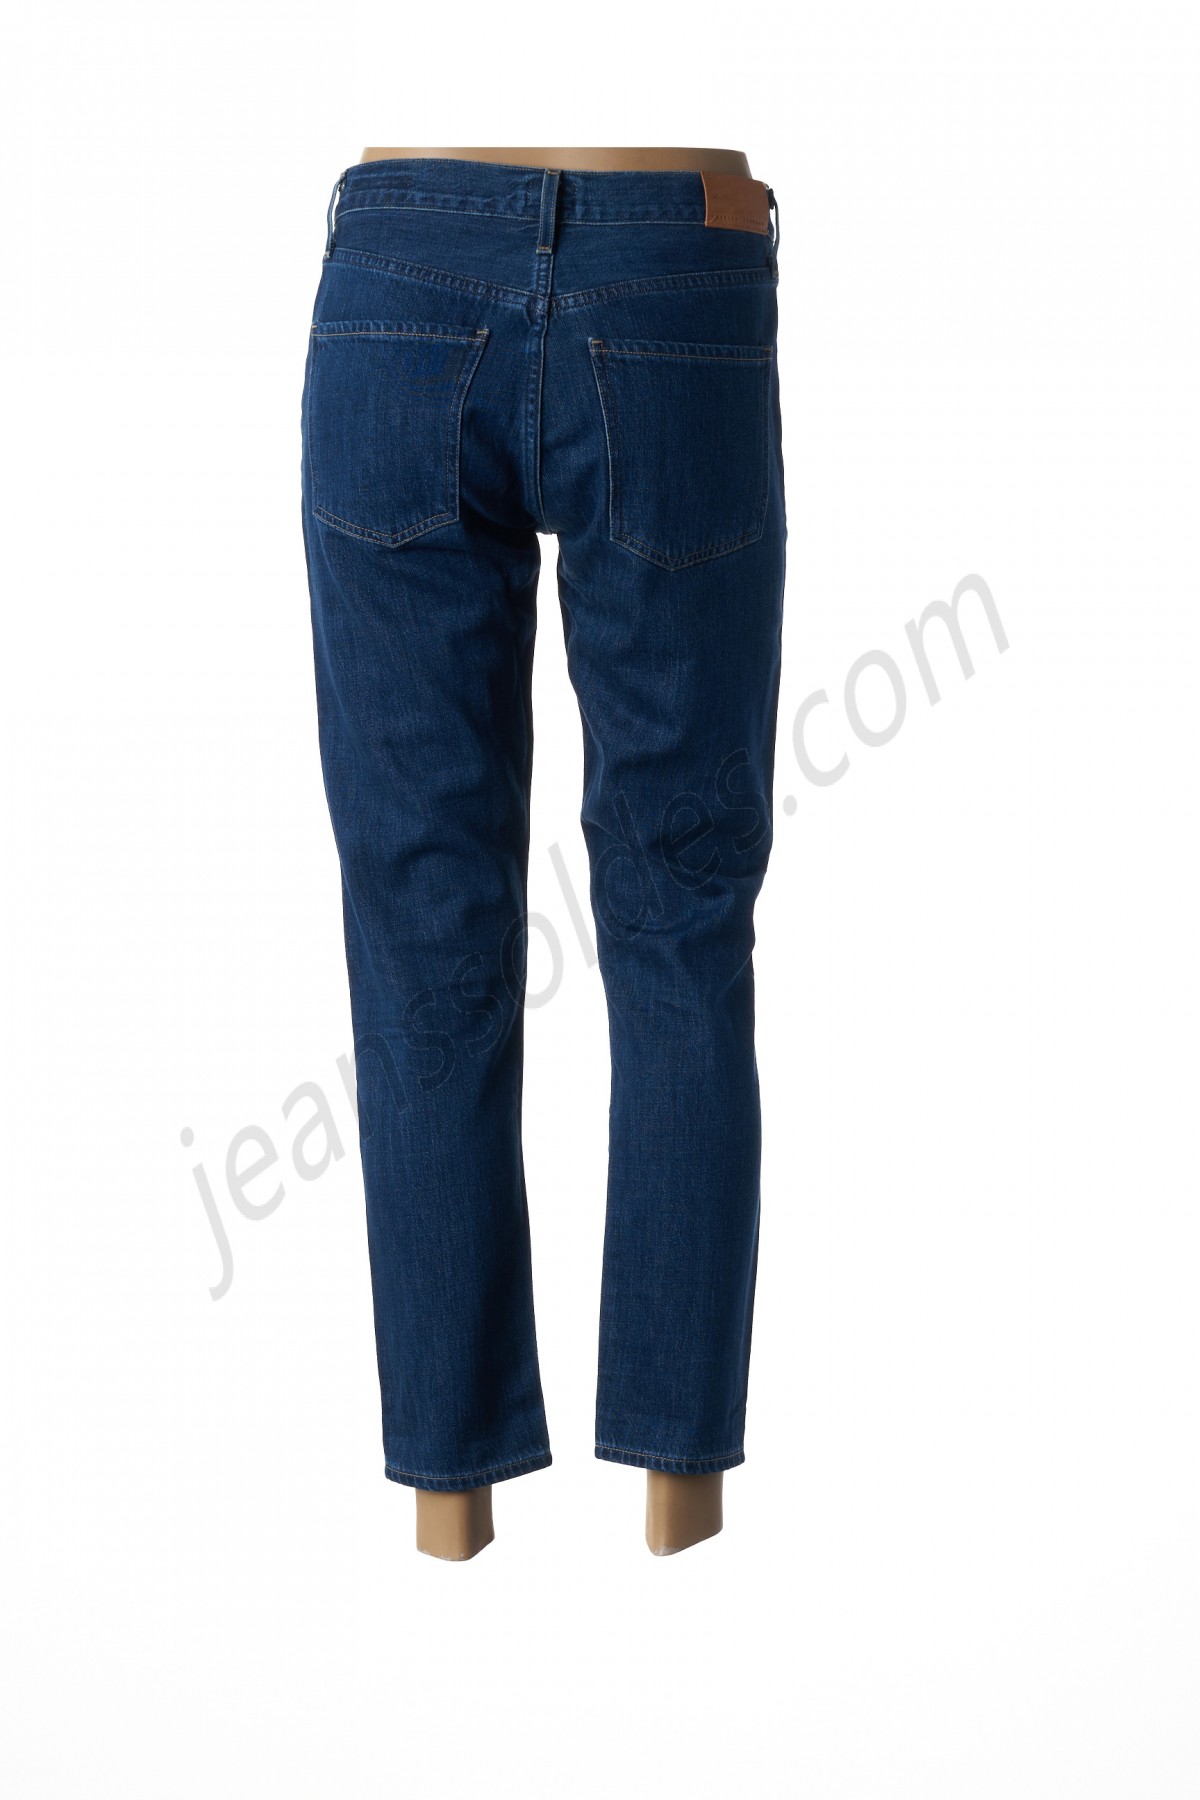 citizens of humanity-Jeans coupe droite prix d’amis - -1